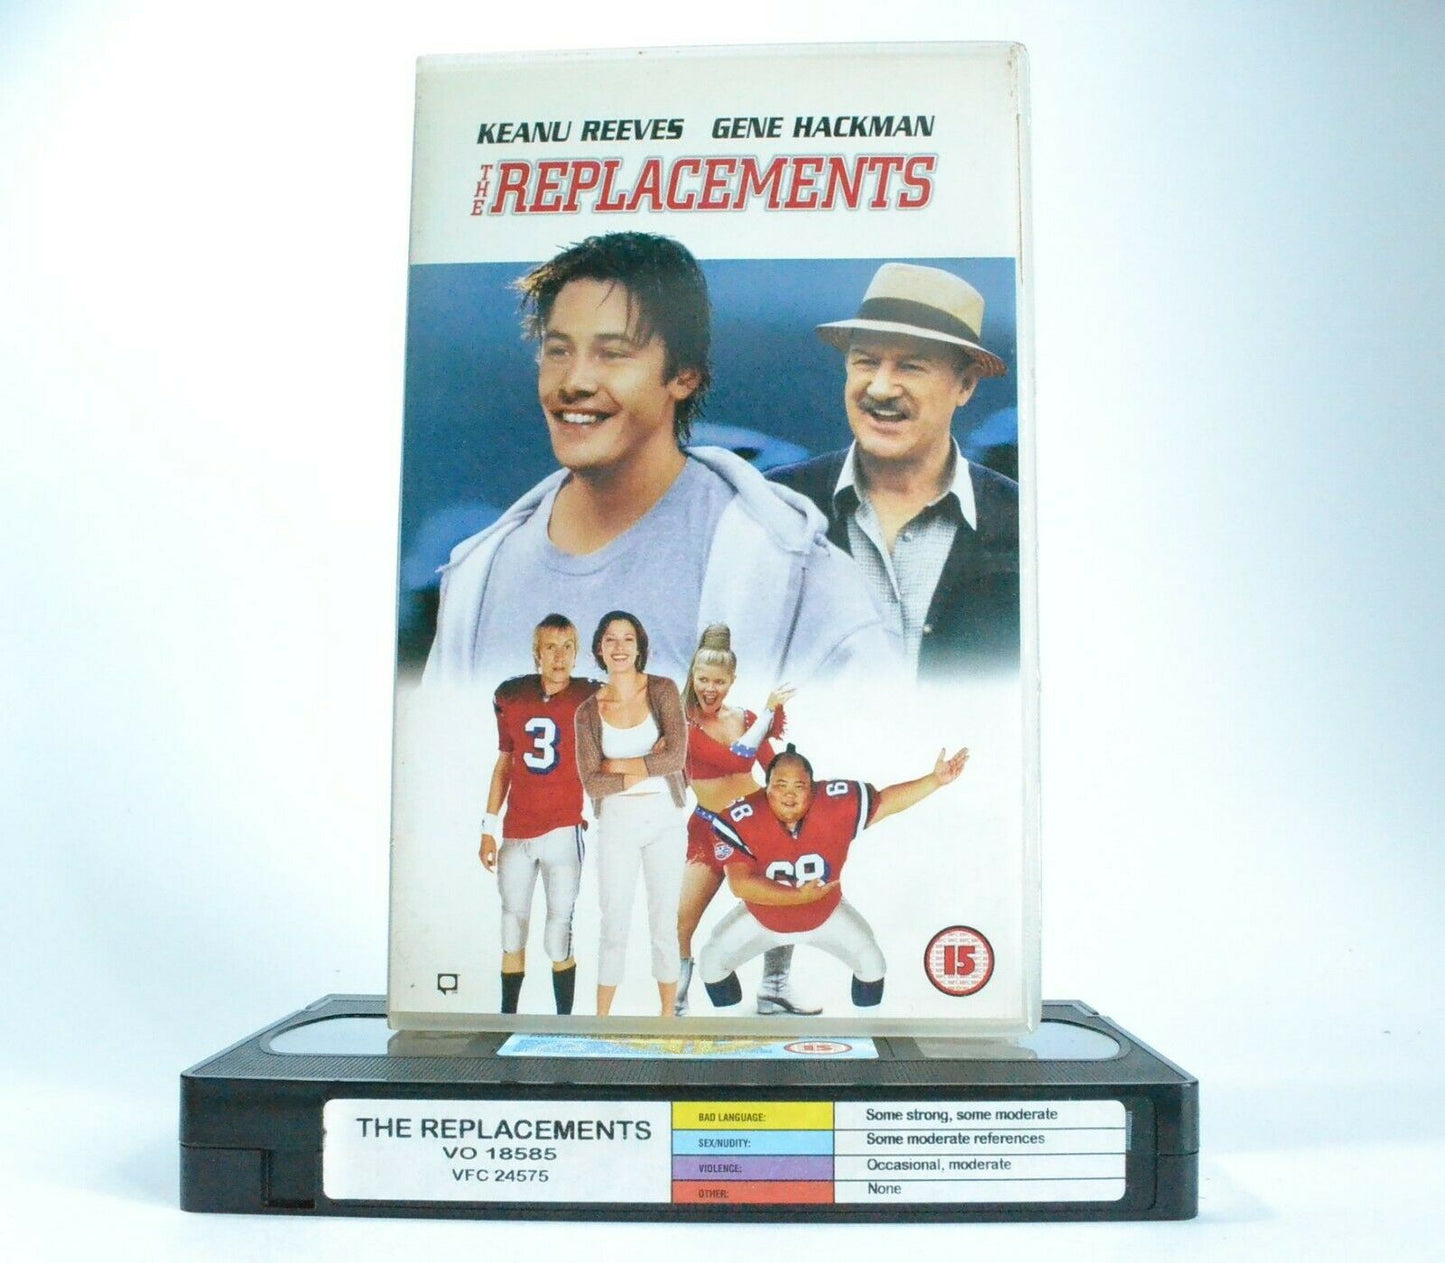 The Replacements: Sports Comedy (2000) - Large Box - K.Reeves/G.Hackman - VHS-